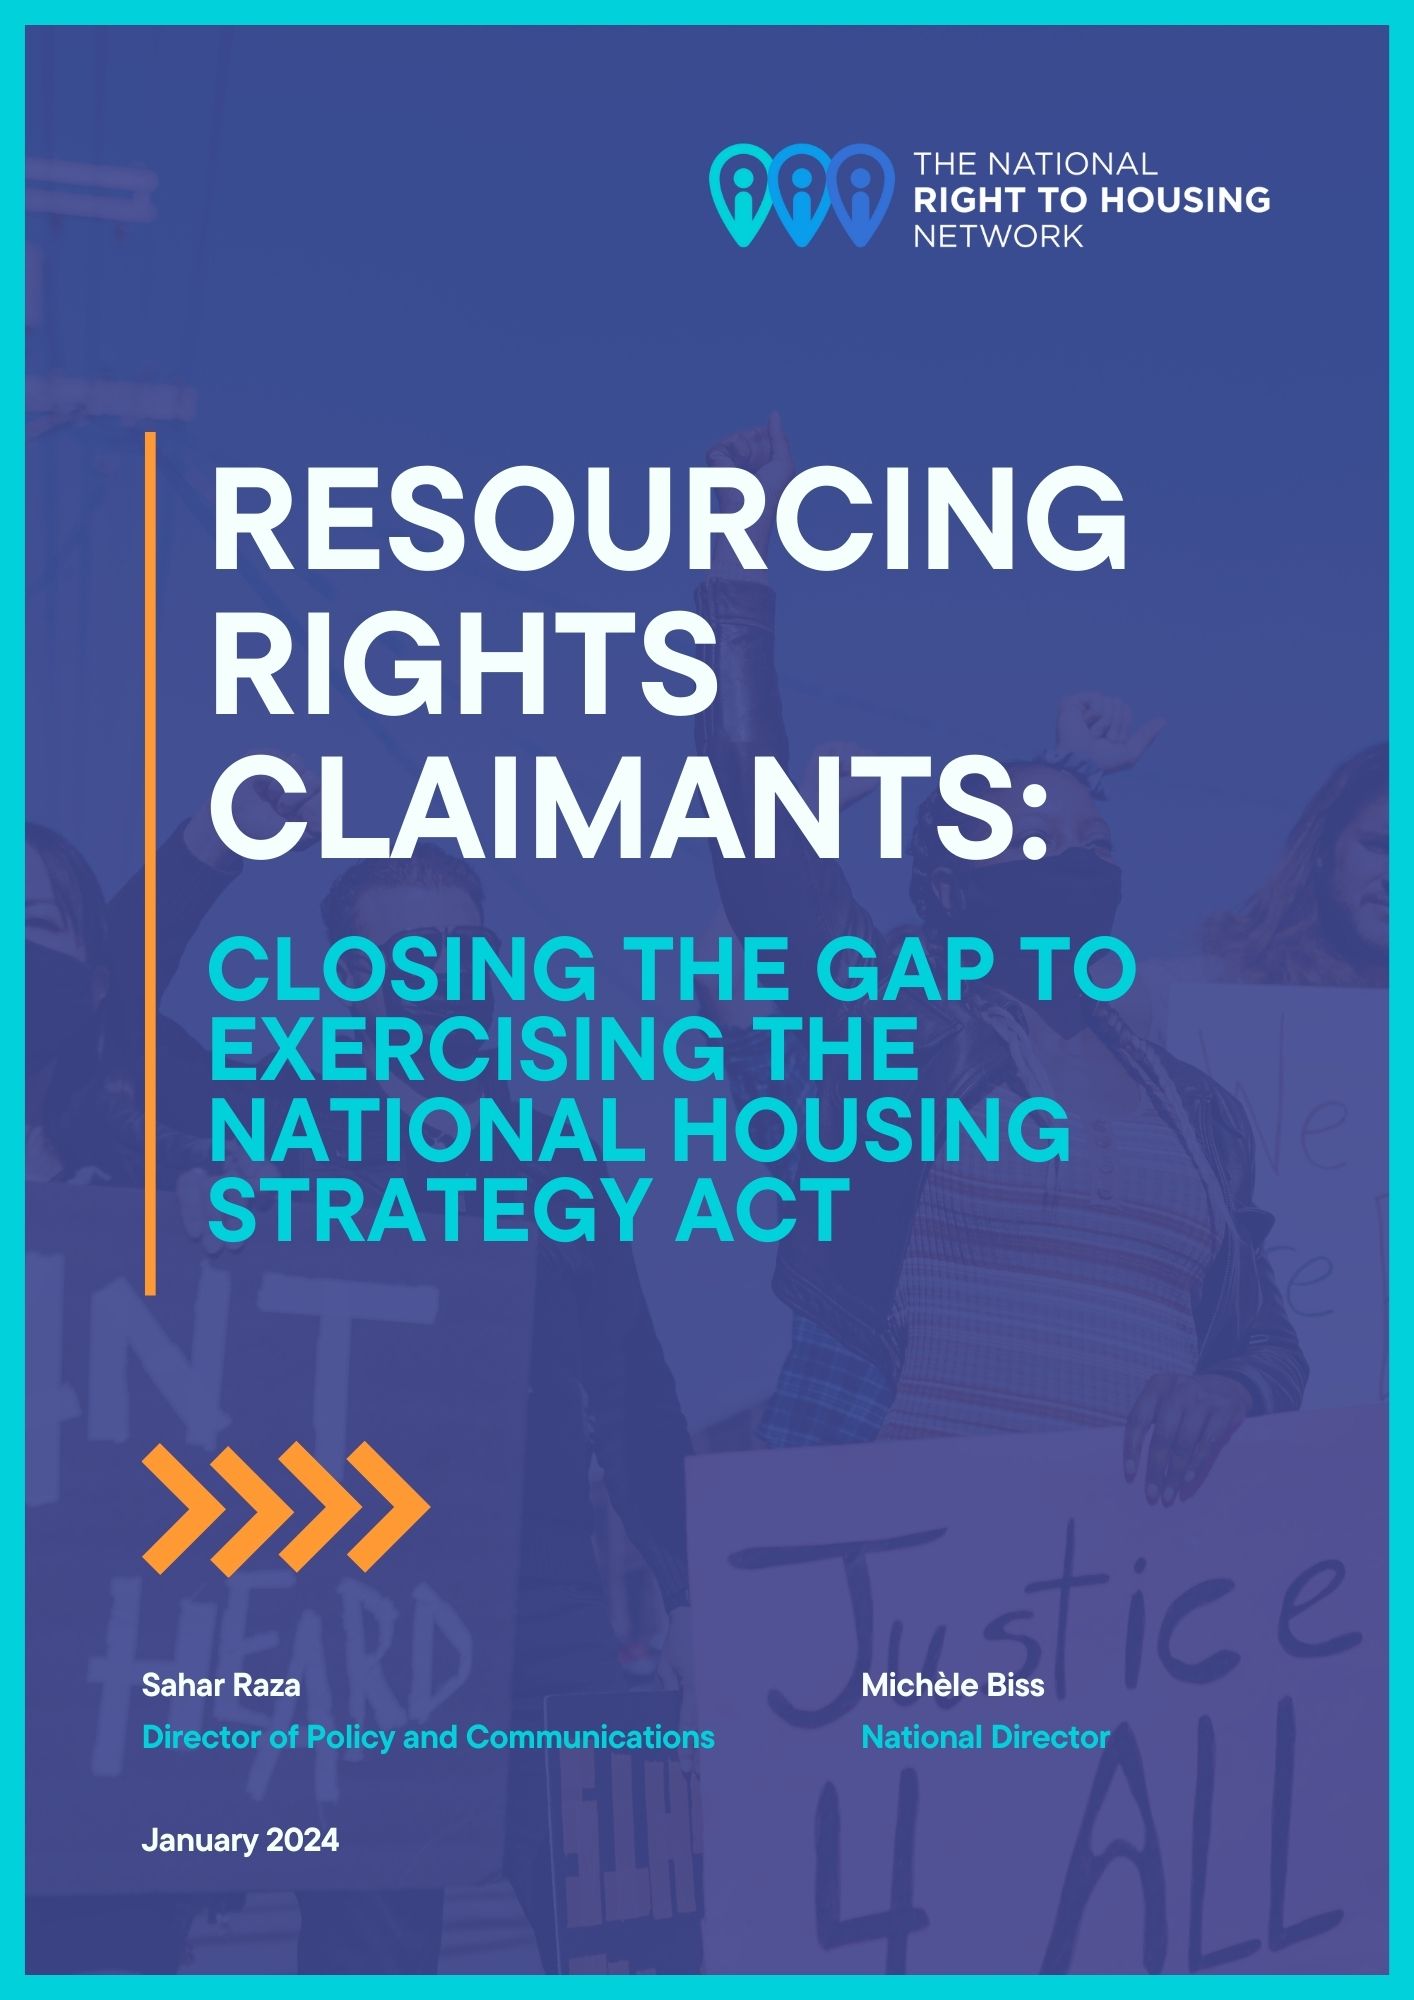 Resourcing Rights Claimants Paper National Right To Housing Network 2024 